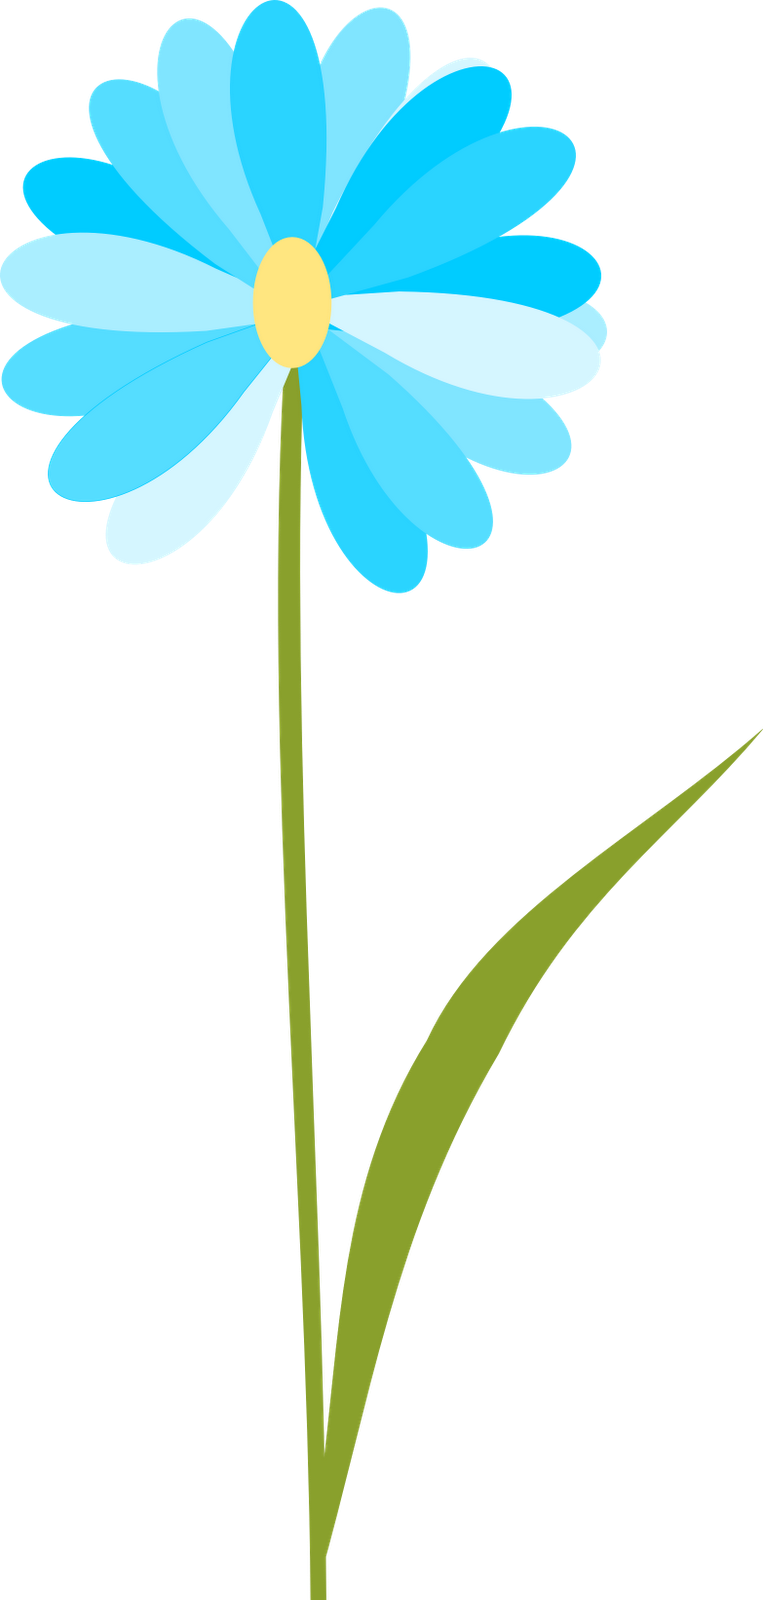 Flower With Transparent Background Clipart